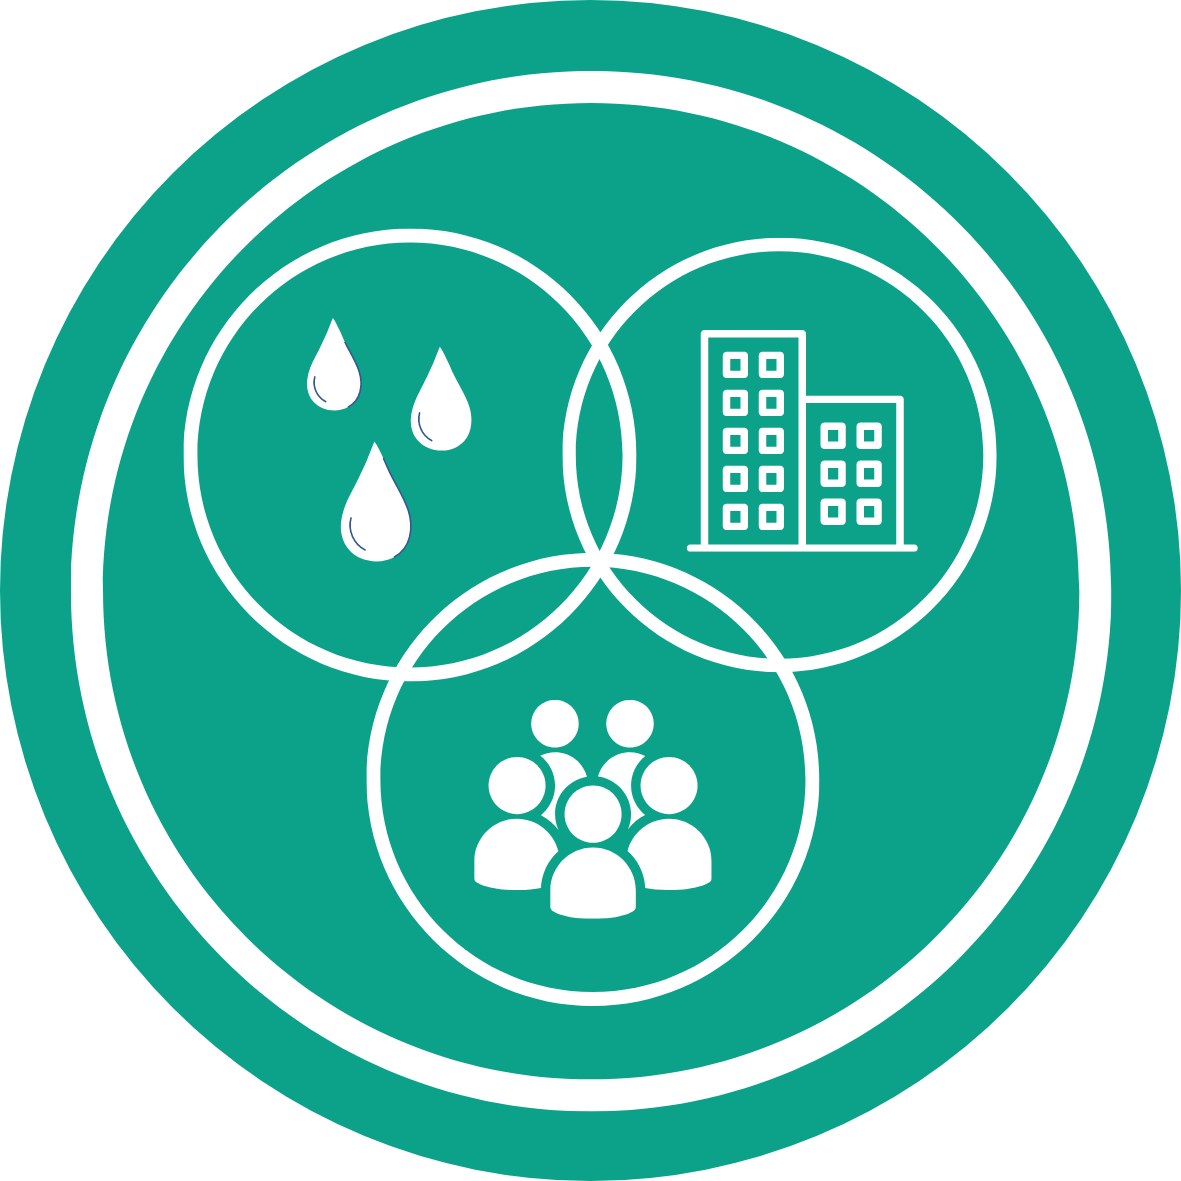 Solutions icon